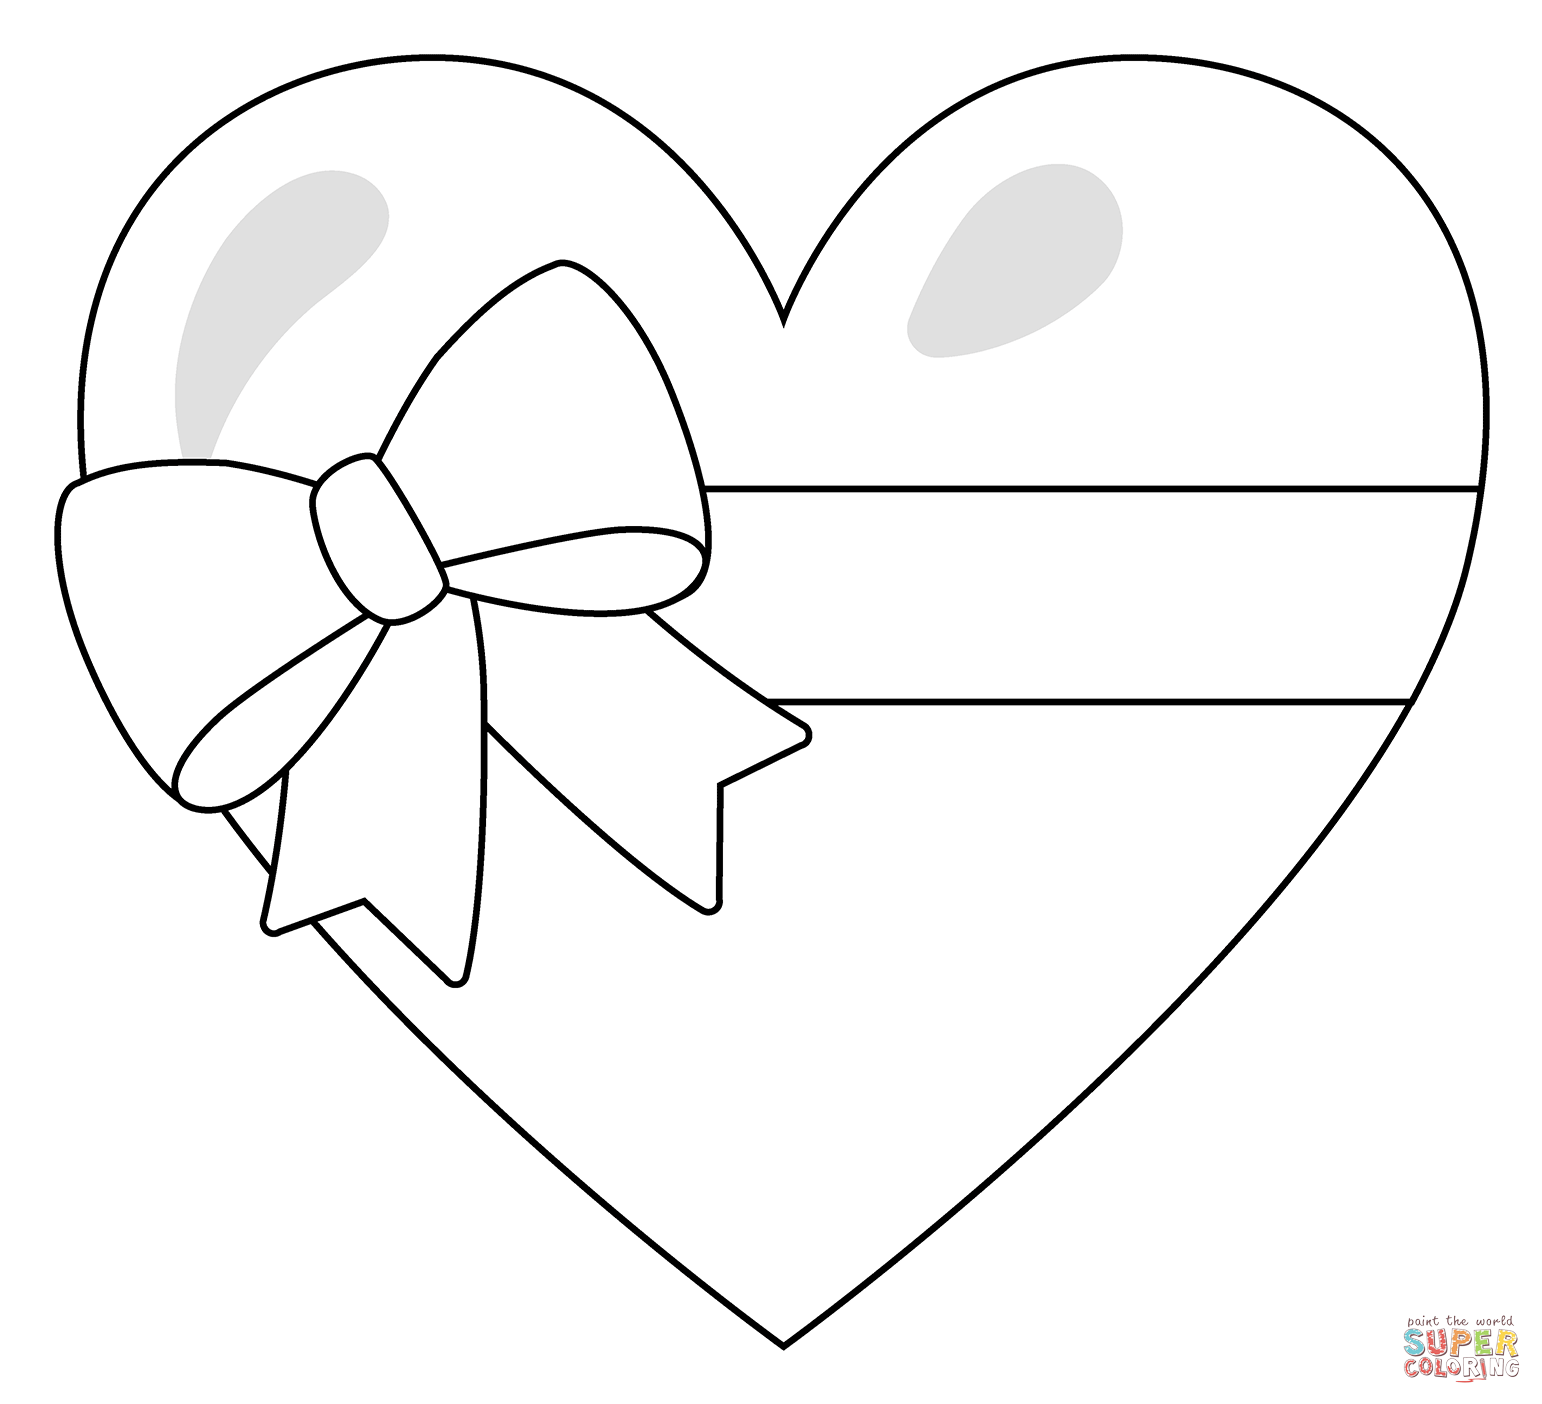 Heart with ribbon emoji coloring page free printable coloring pages